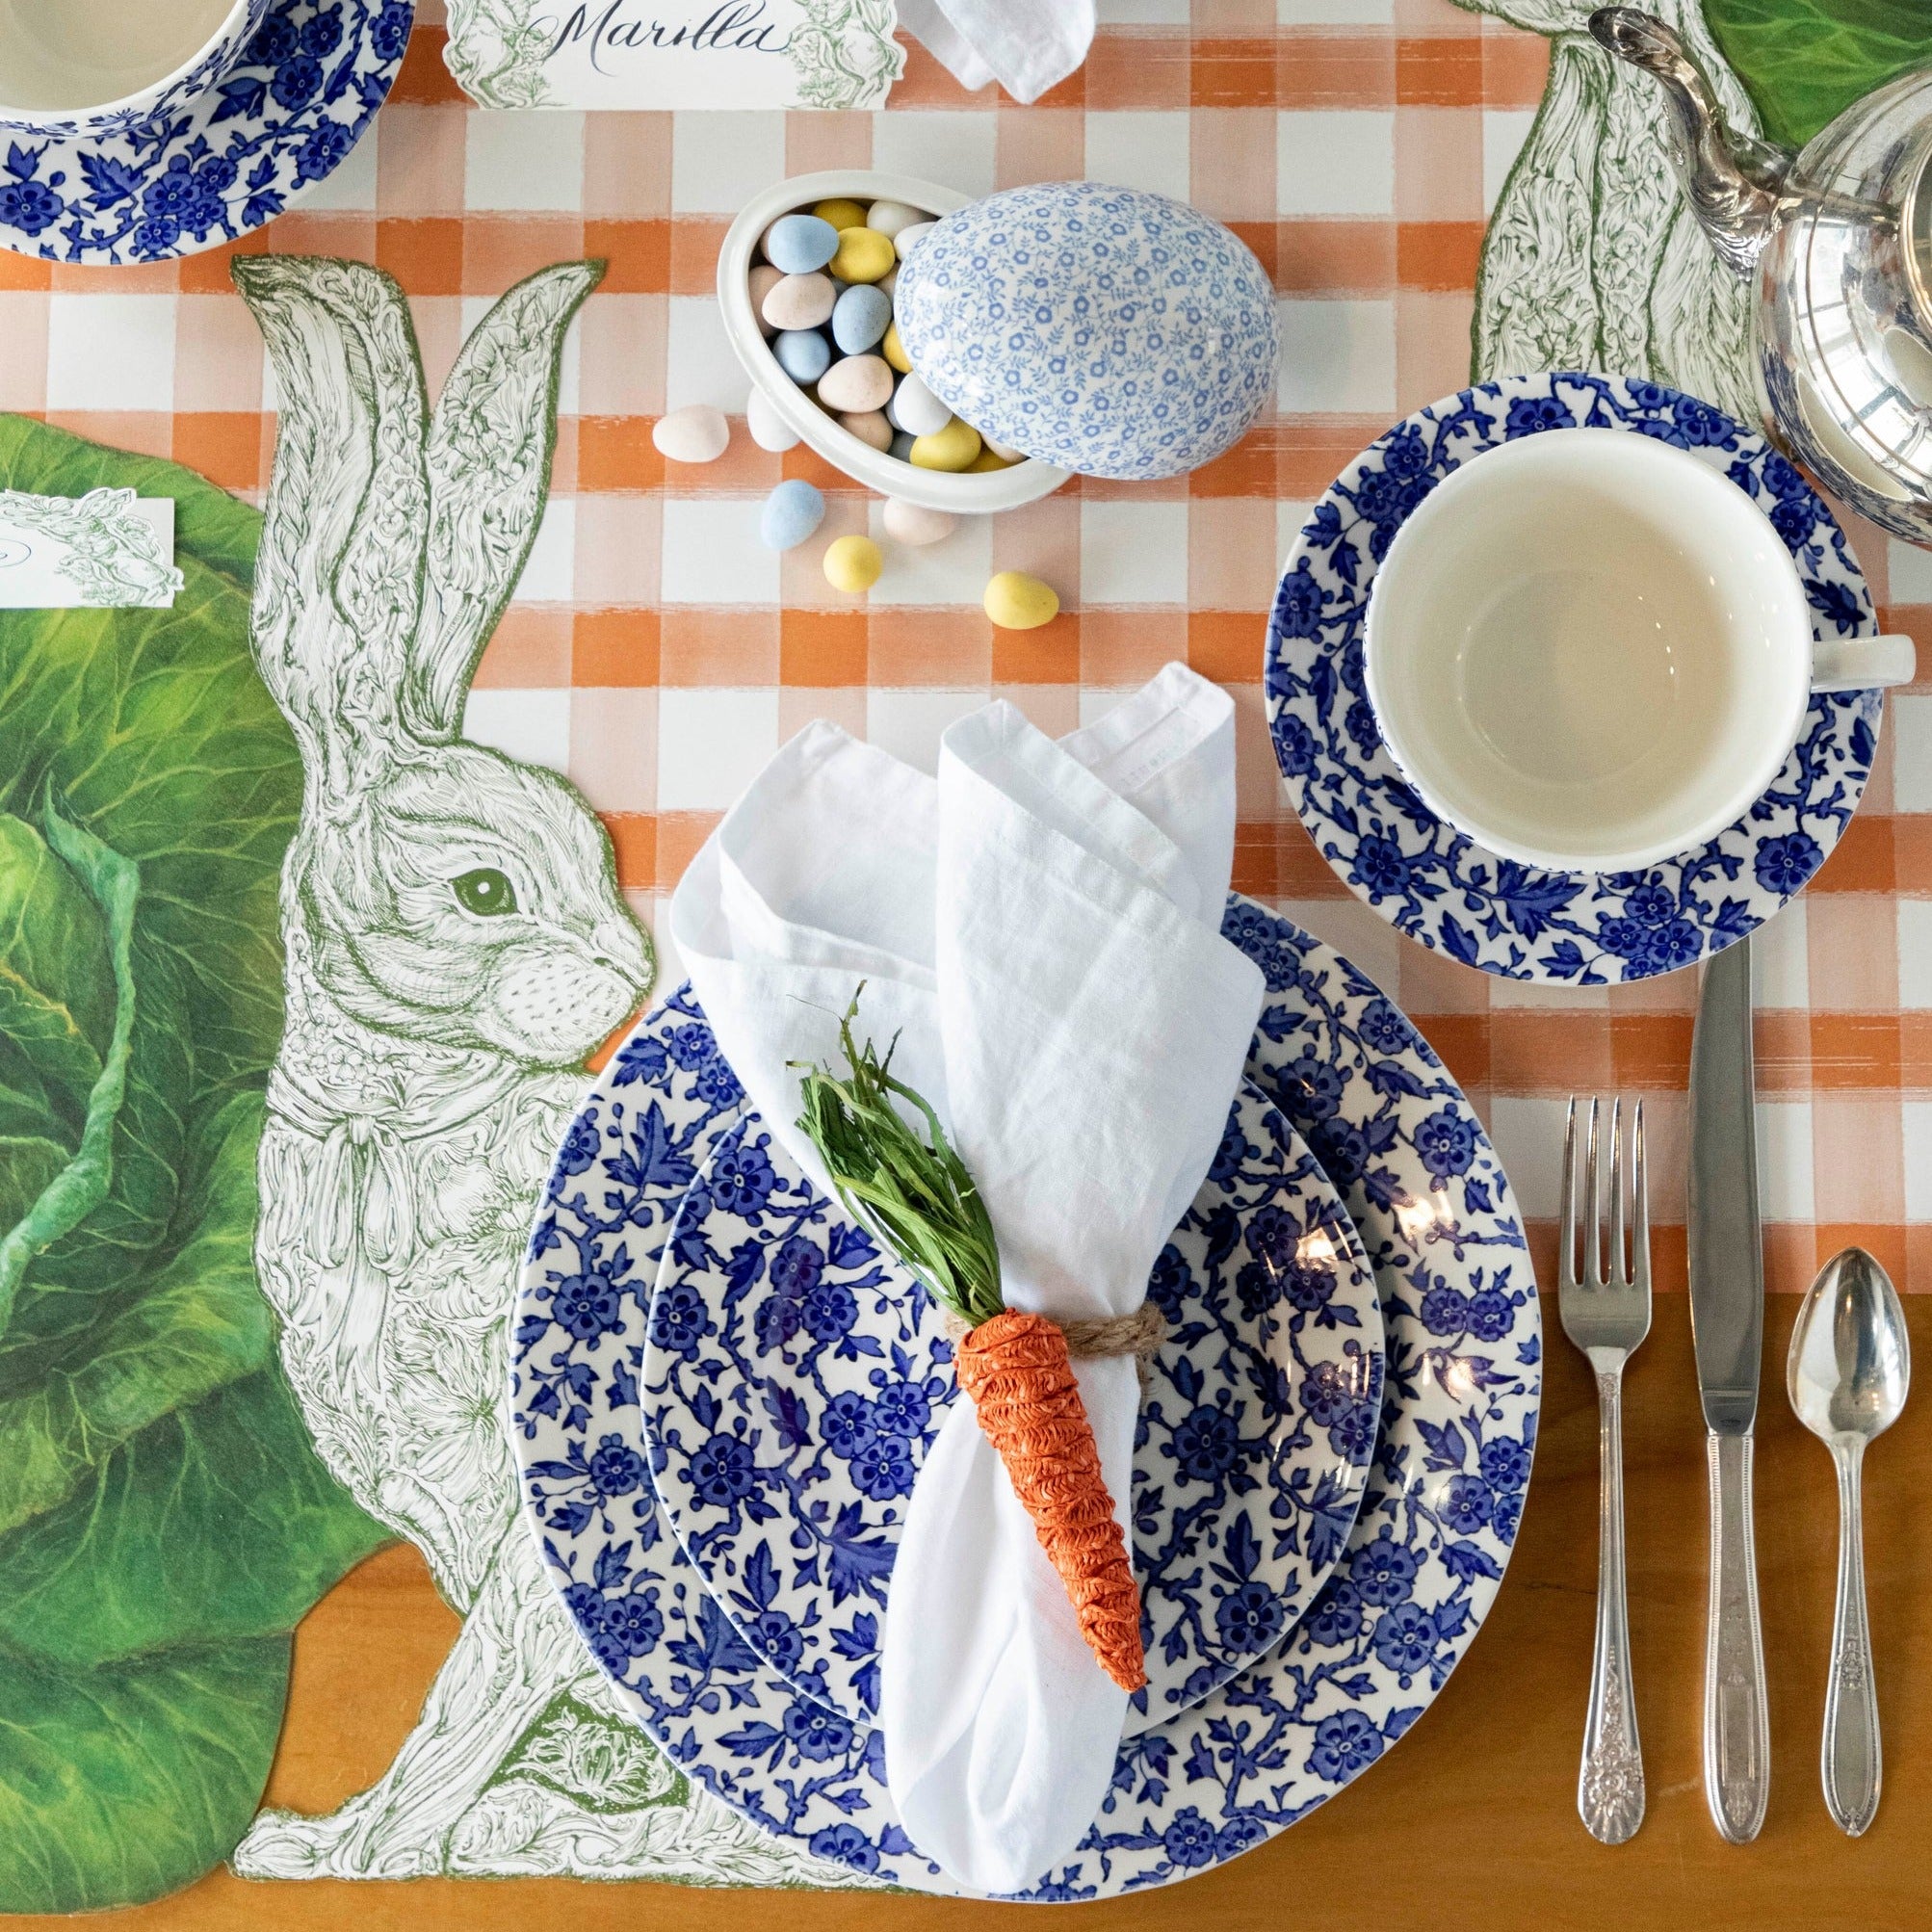 The Die-cut Greenhouse Hare Placemat under an elegant Easter place setting, from above.